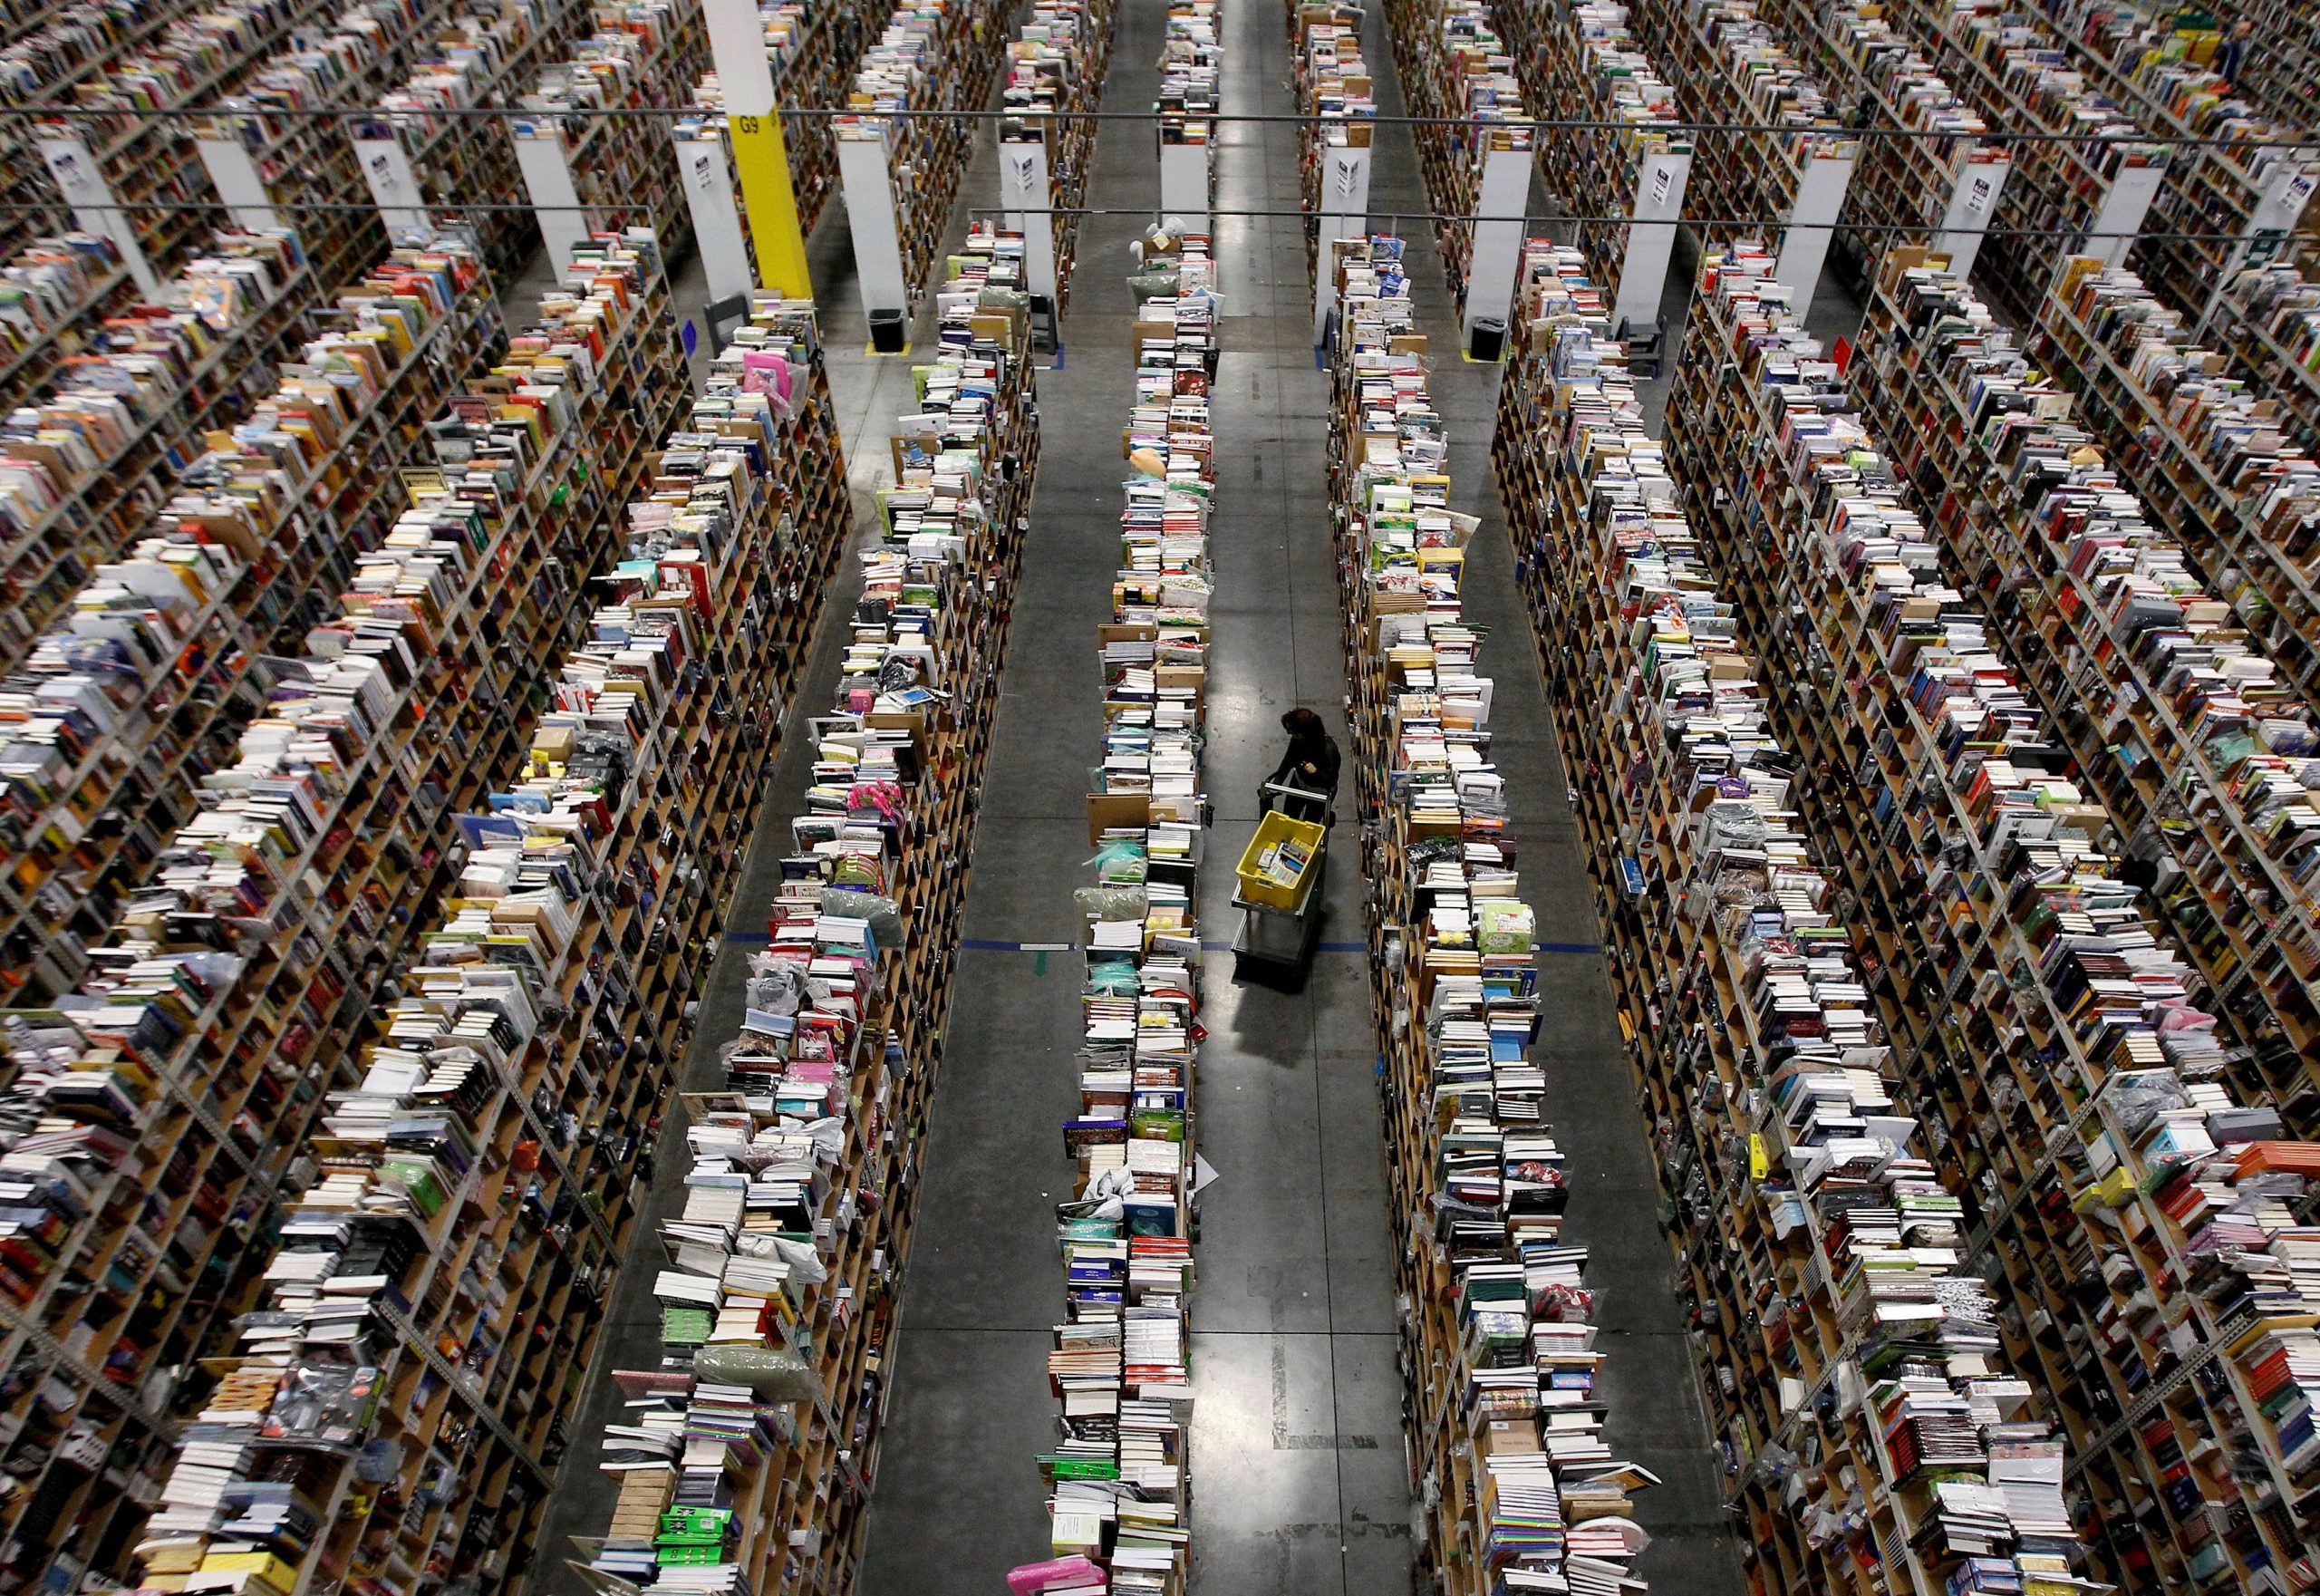 Amazon warehouse in Phoenix with rows of books.JPG